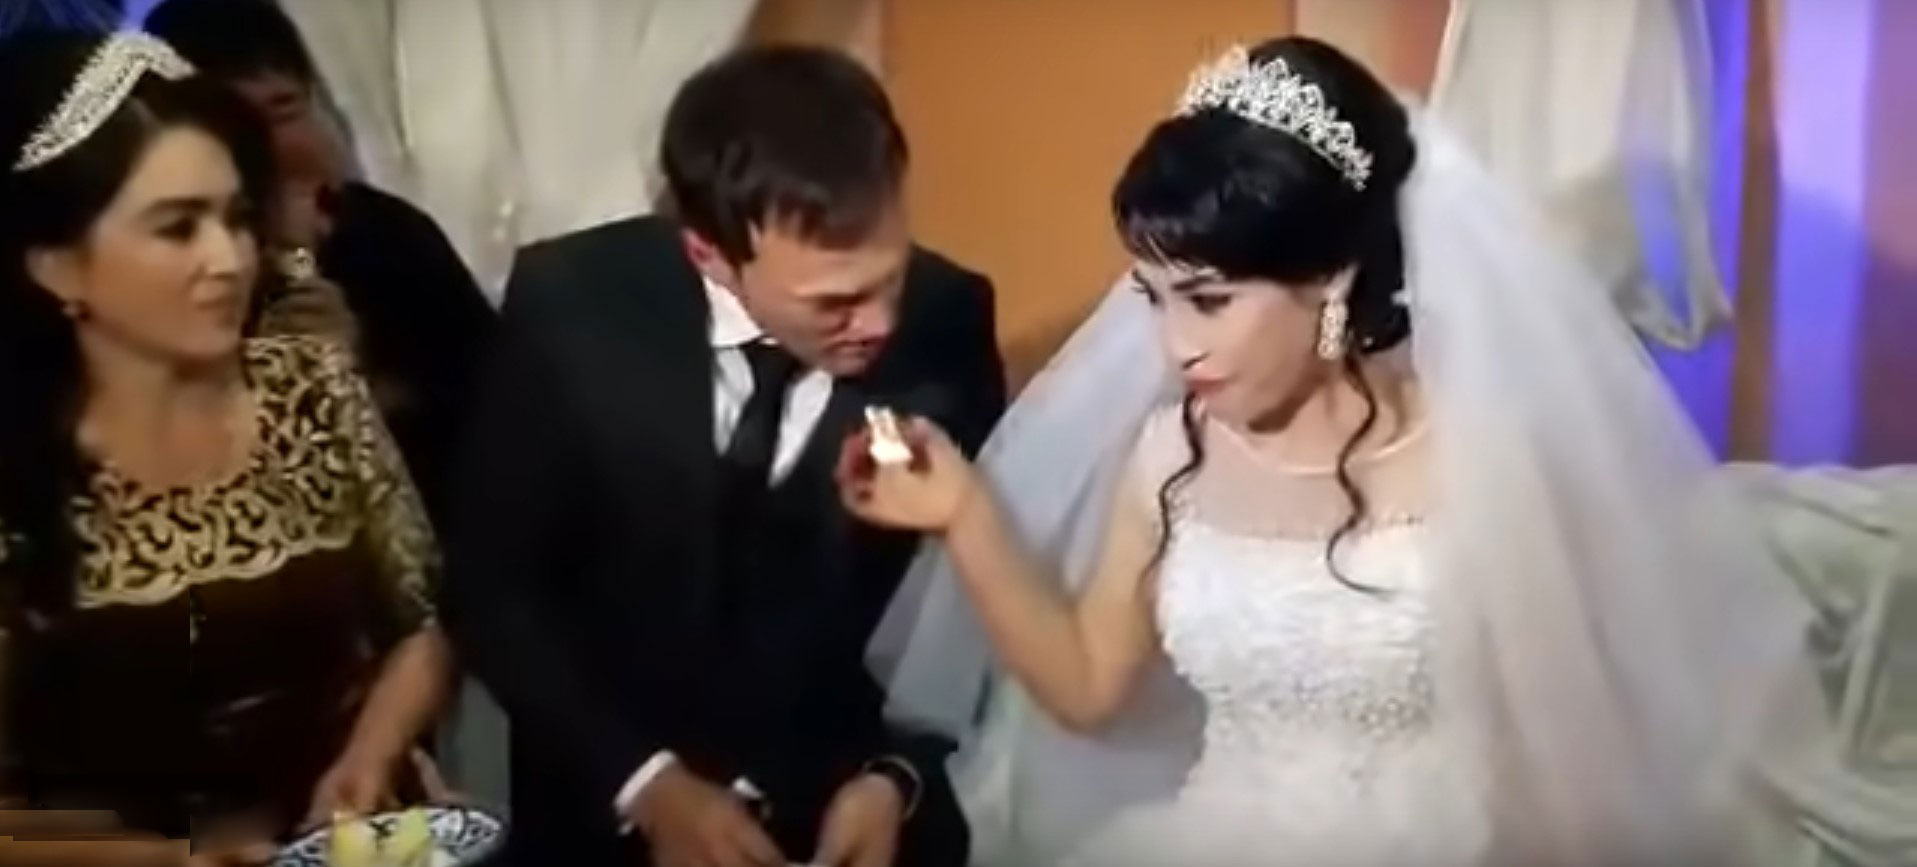 Groom Ruthlessly Slaps Bride On Wedding Day After She Playfully Teases Him With Cake 9445